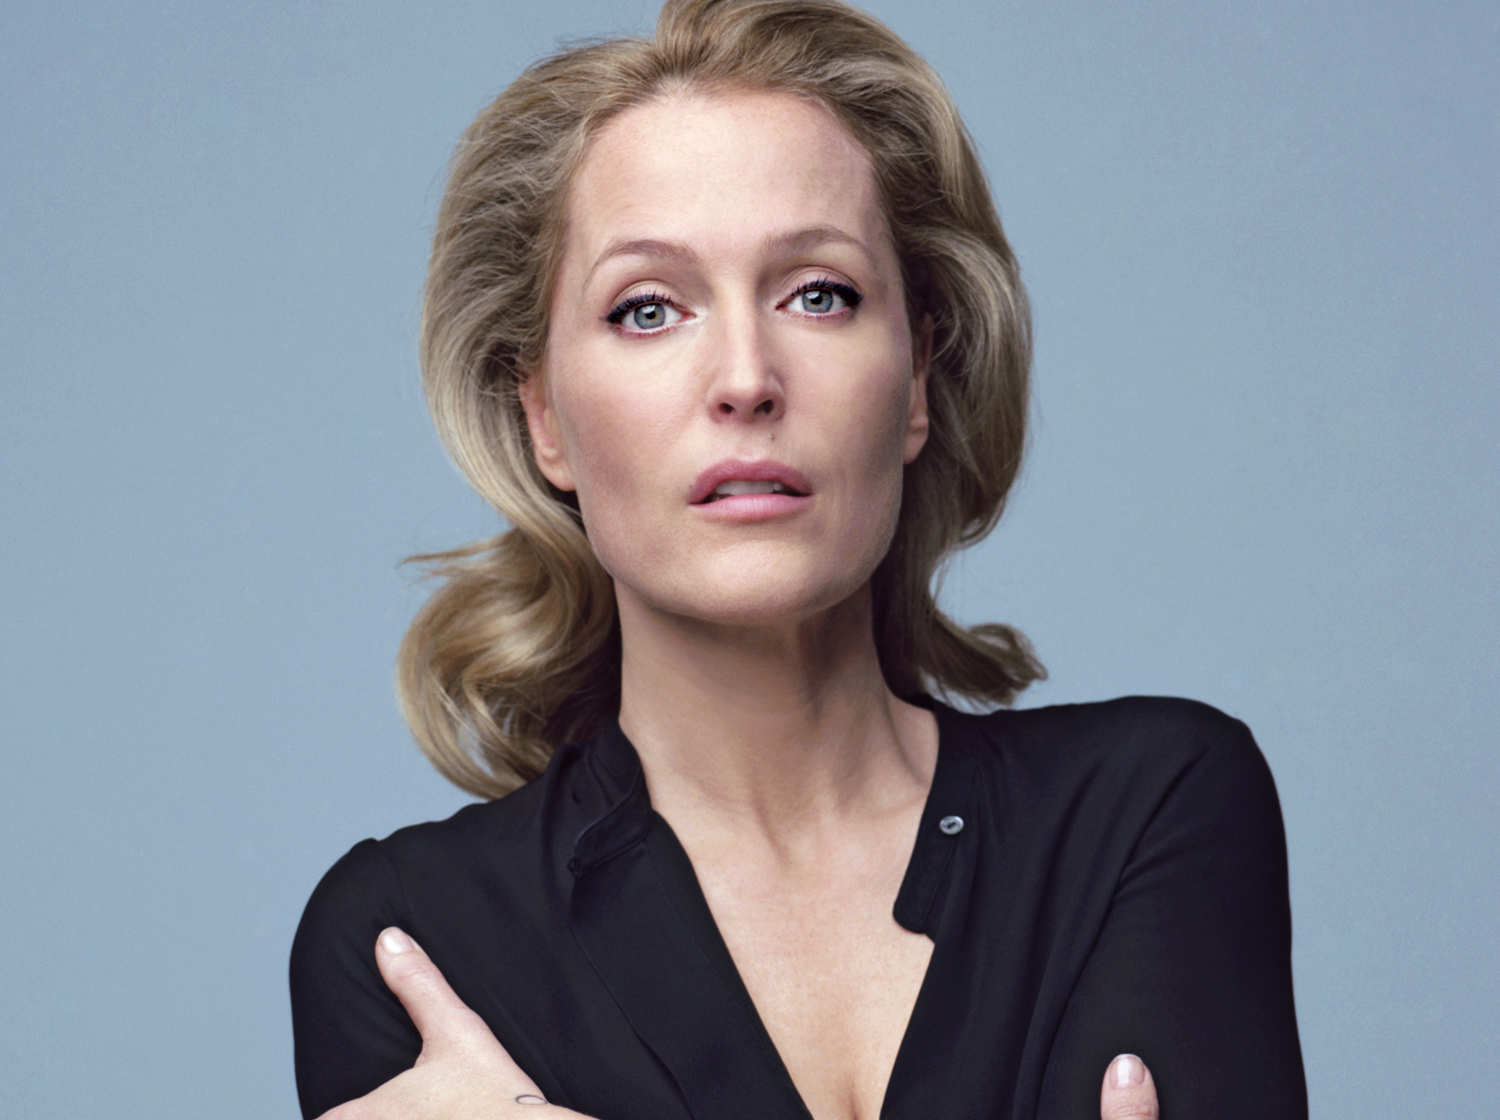 Happy birthday to the awesomely awesome Gillian Anderson! 